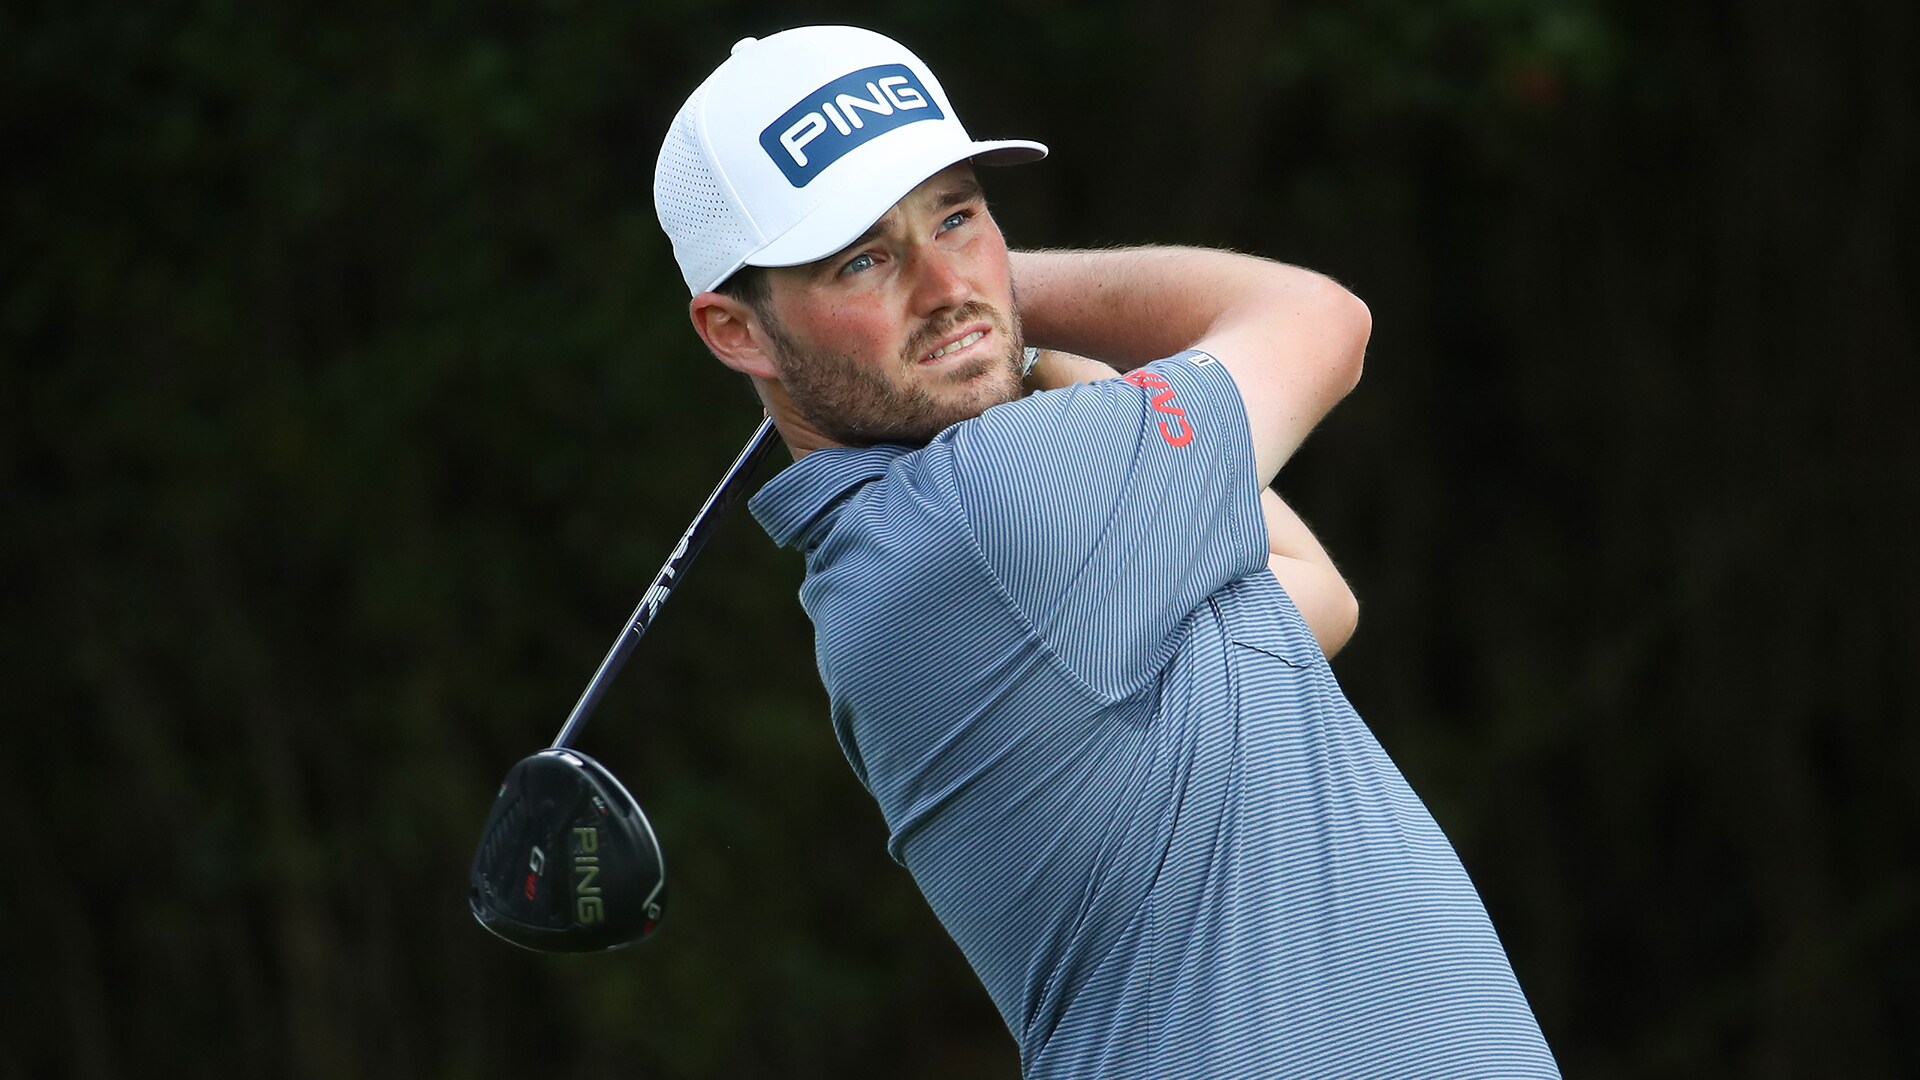 Cormac Sharvin leads packed leaderboard at English Championship